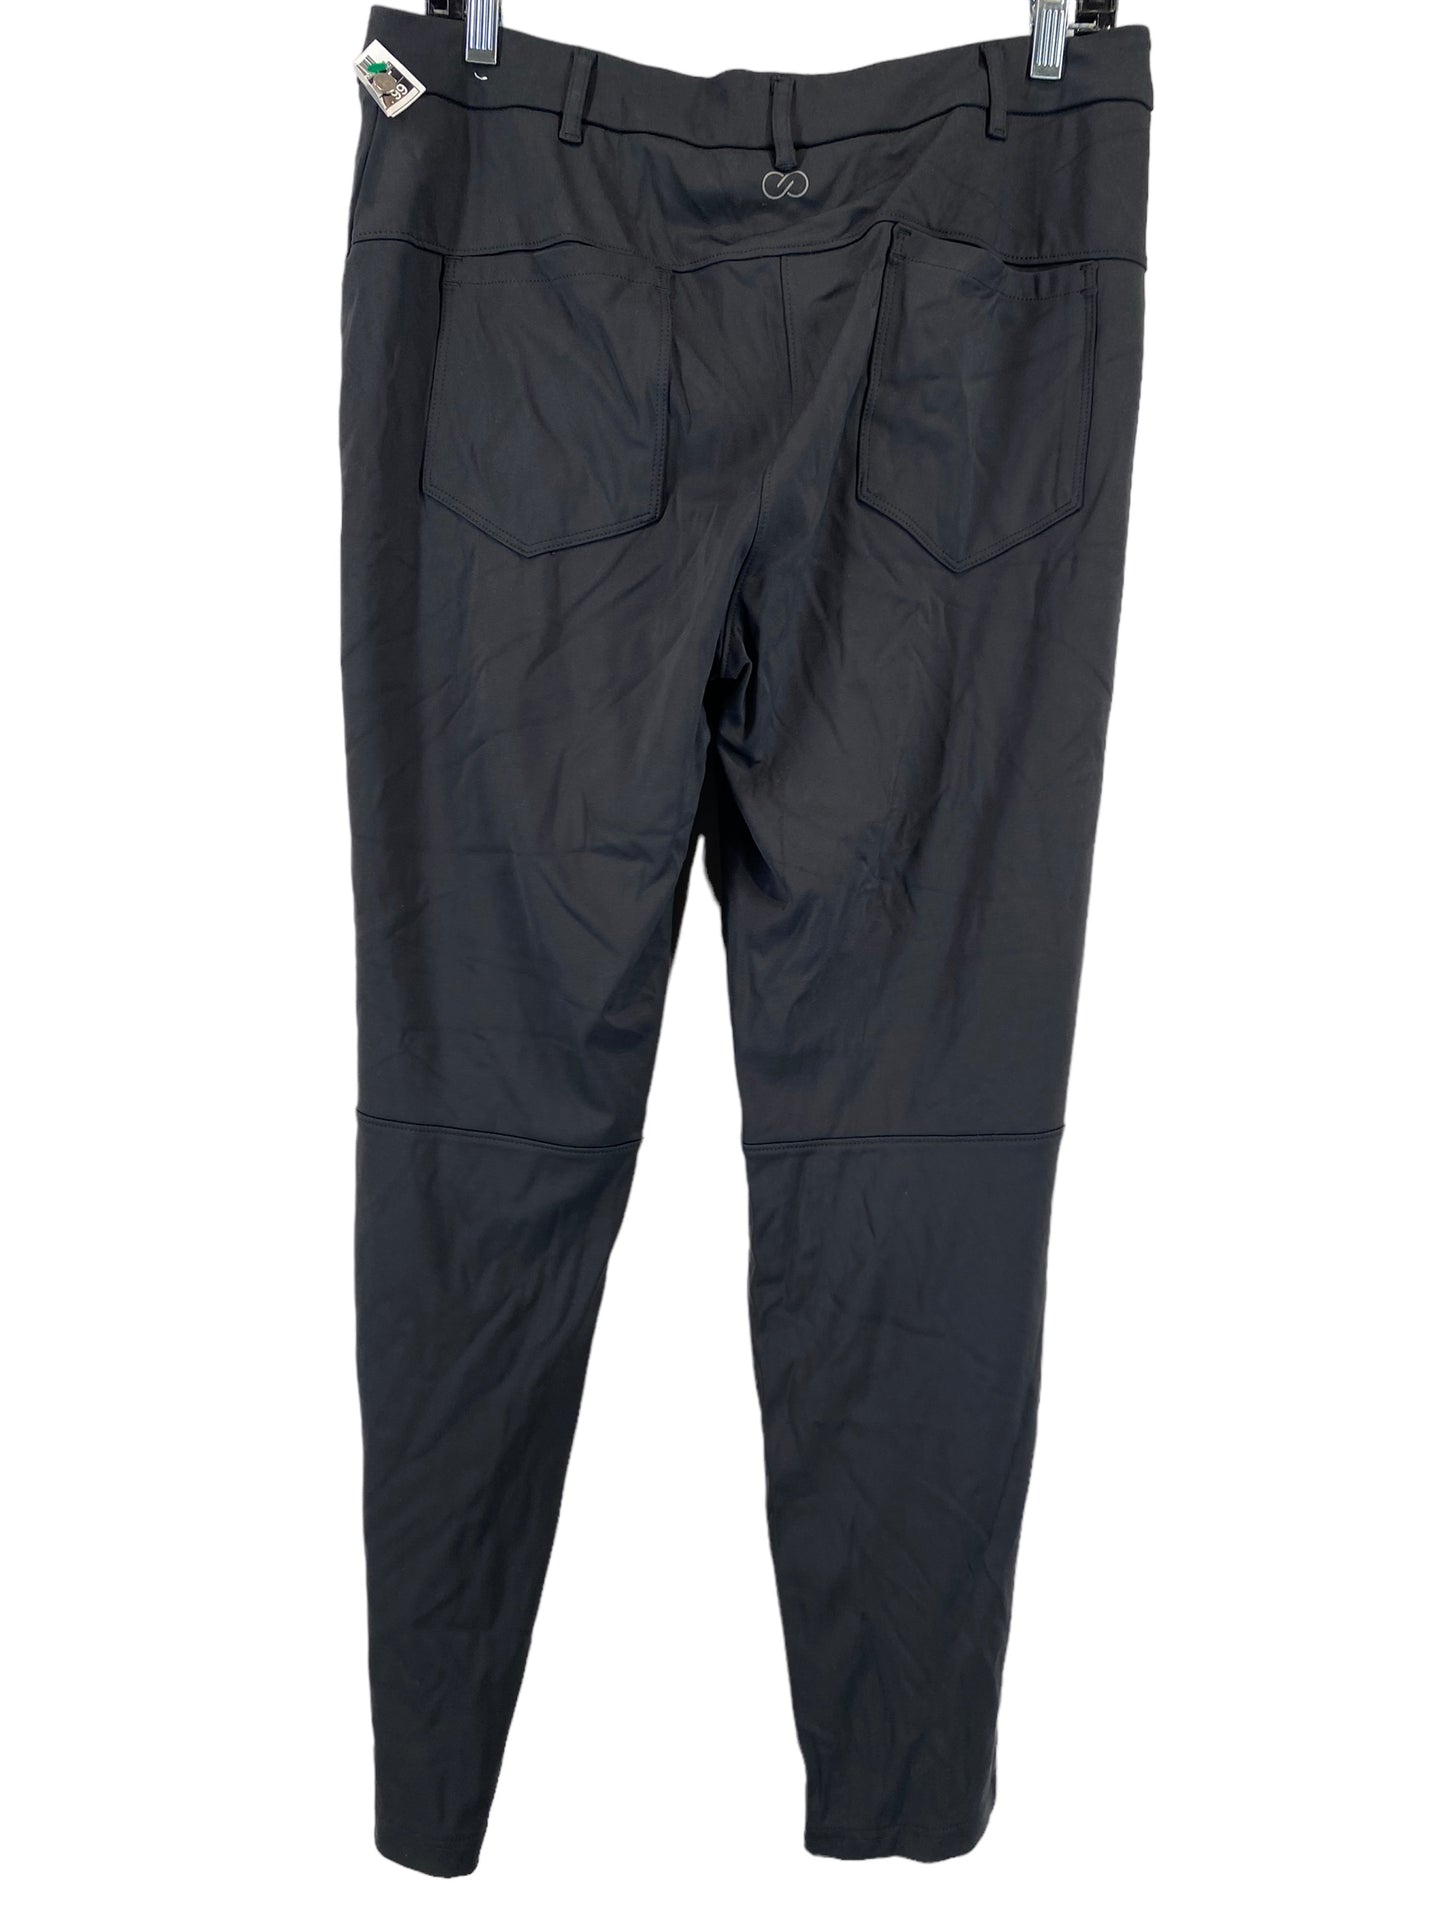 Athletic Pants By Calia  Size: 10